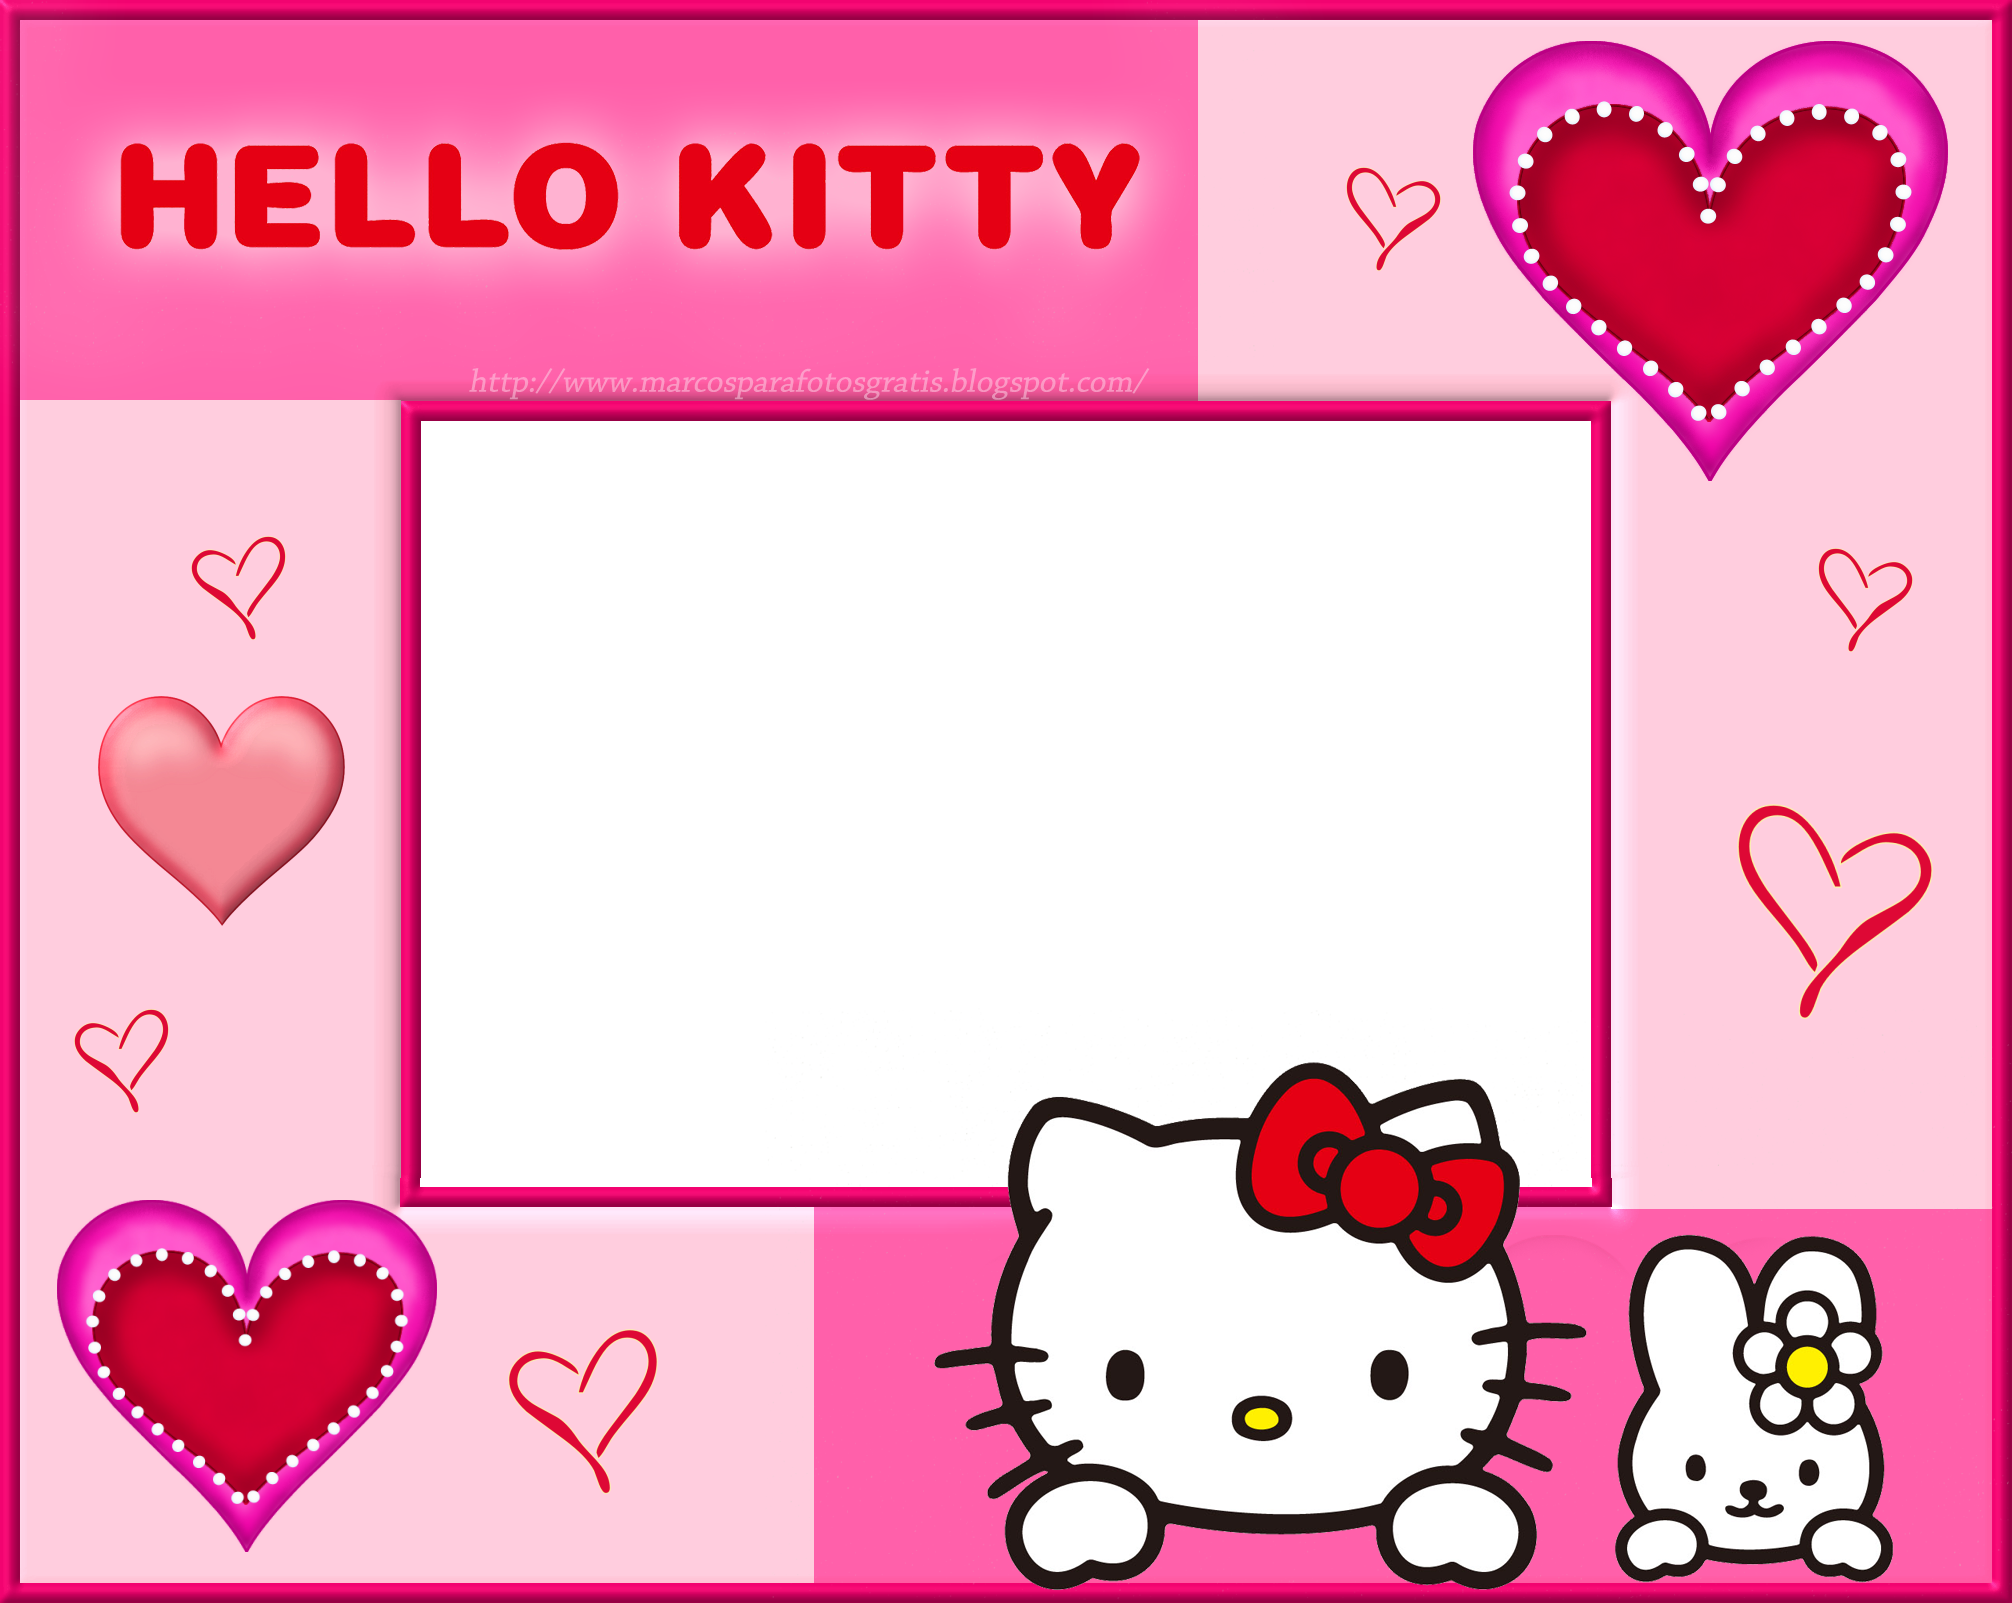 Hello Kitty Wallpaper Images - Wallpaper Cave